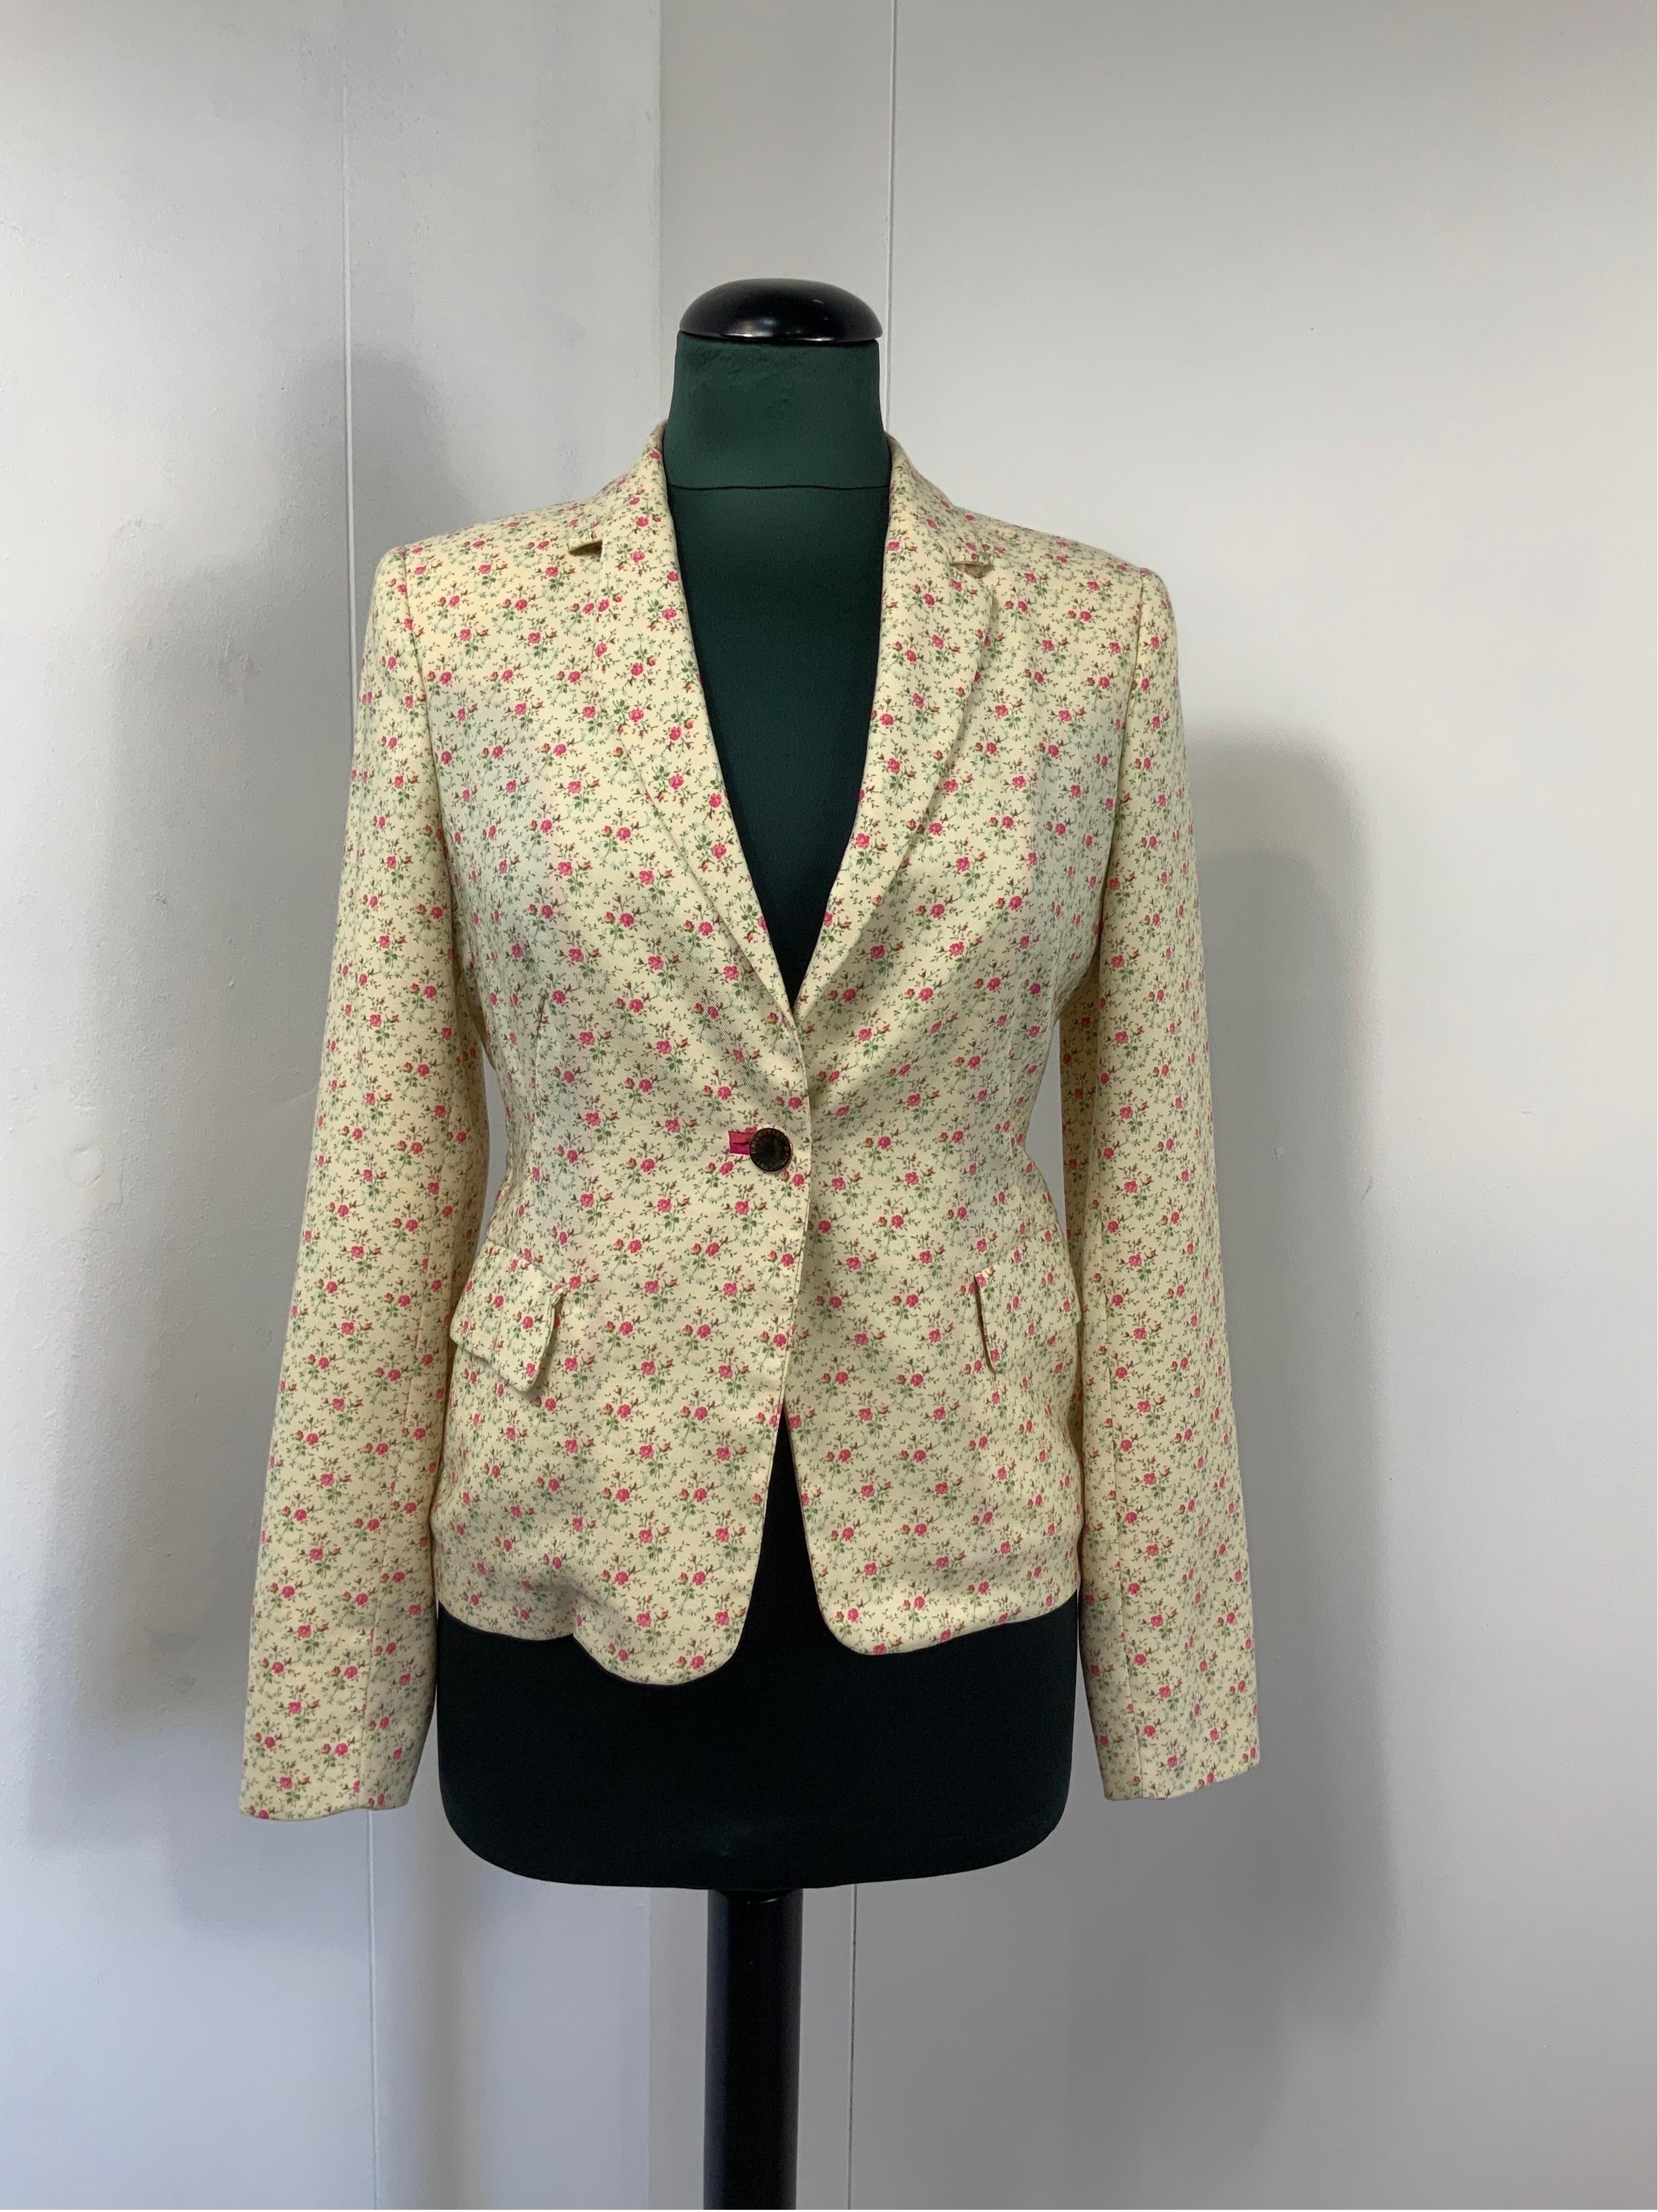 BALLANTYNE FLOWER JACKET.
Cashmere. Very beautiful floral pattern.
Italian size 42.
Shoulders 42 cm
Bust 44 cm
Length 61 cm
Channel 63 cm
Excellent overall condition, like new. Has some pulled threads.